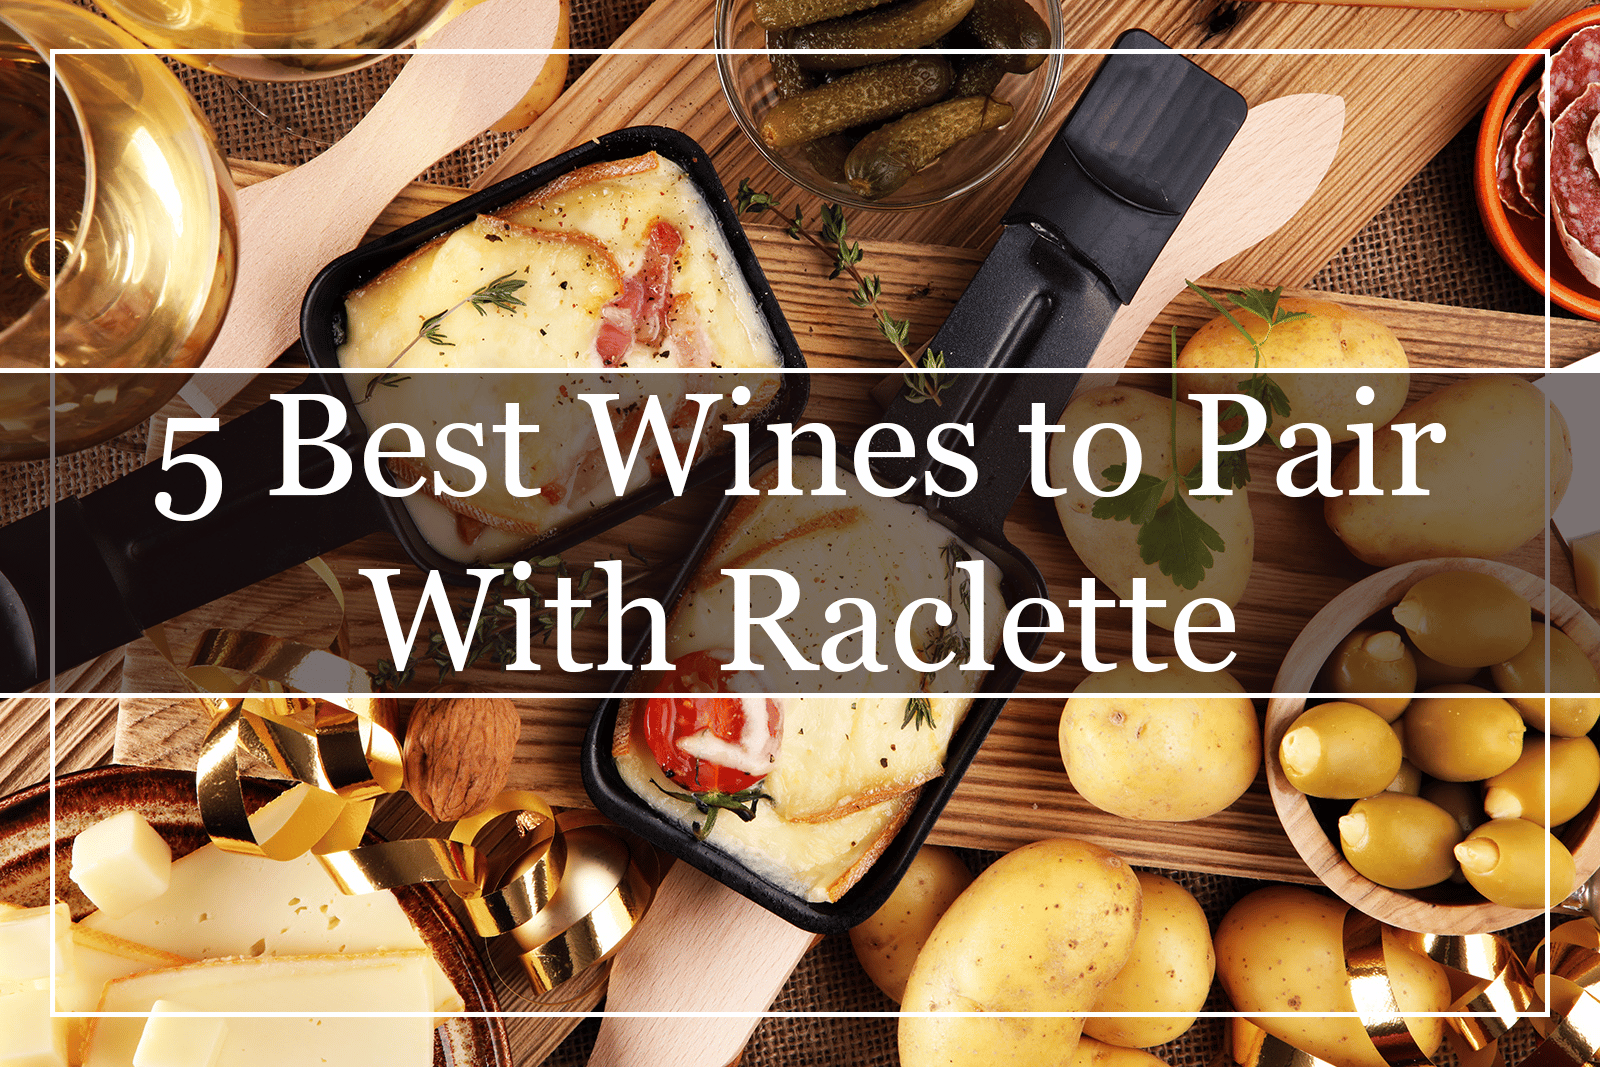 5 Best Wines to Pair With Raclette (2022)